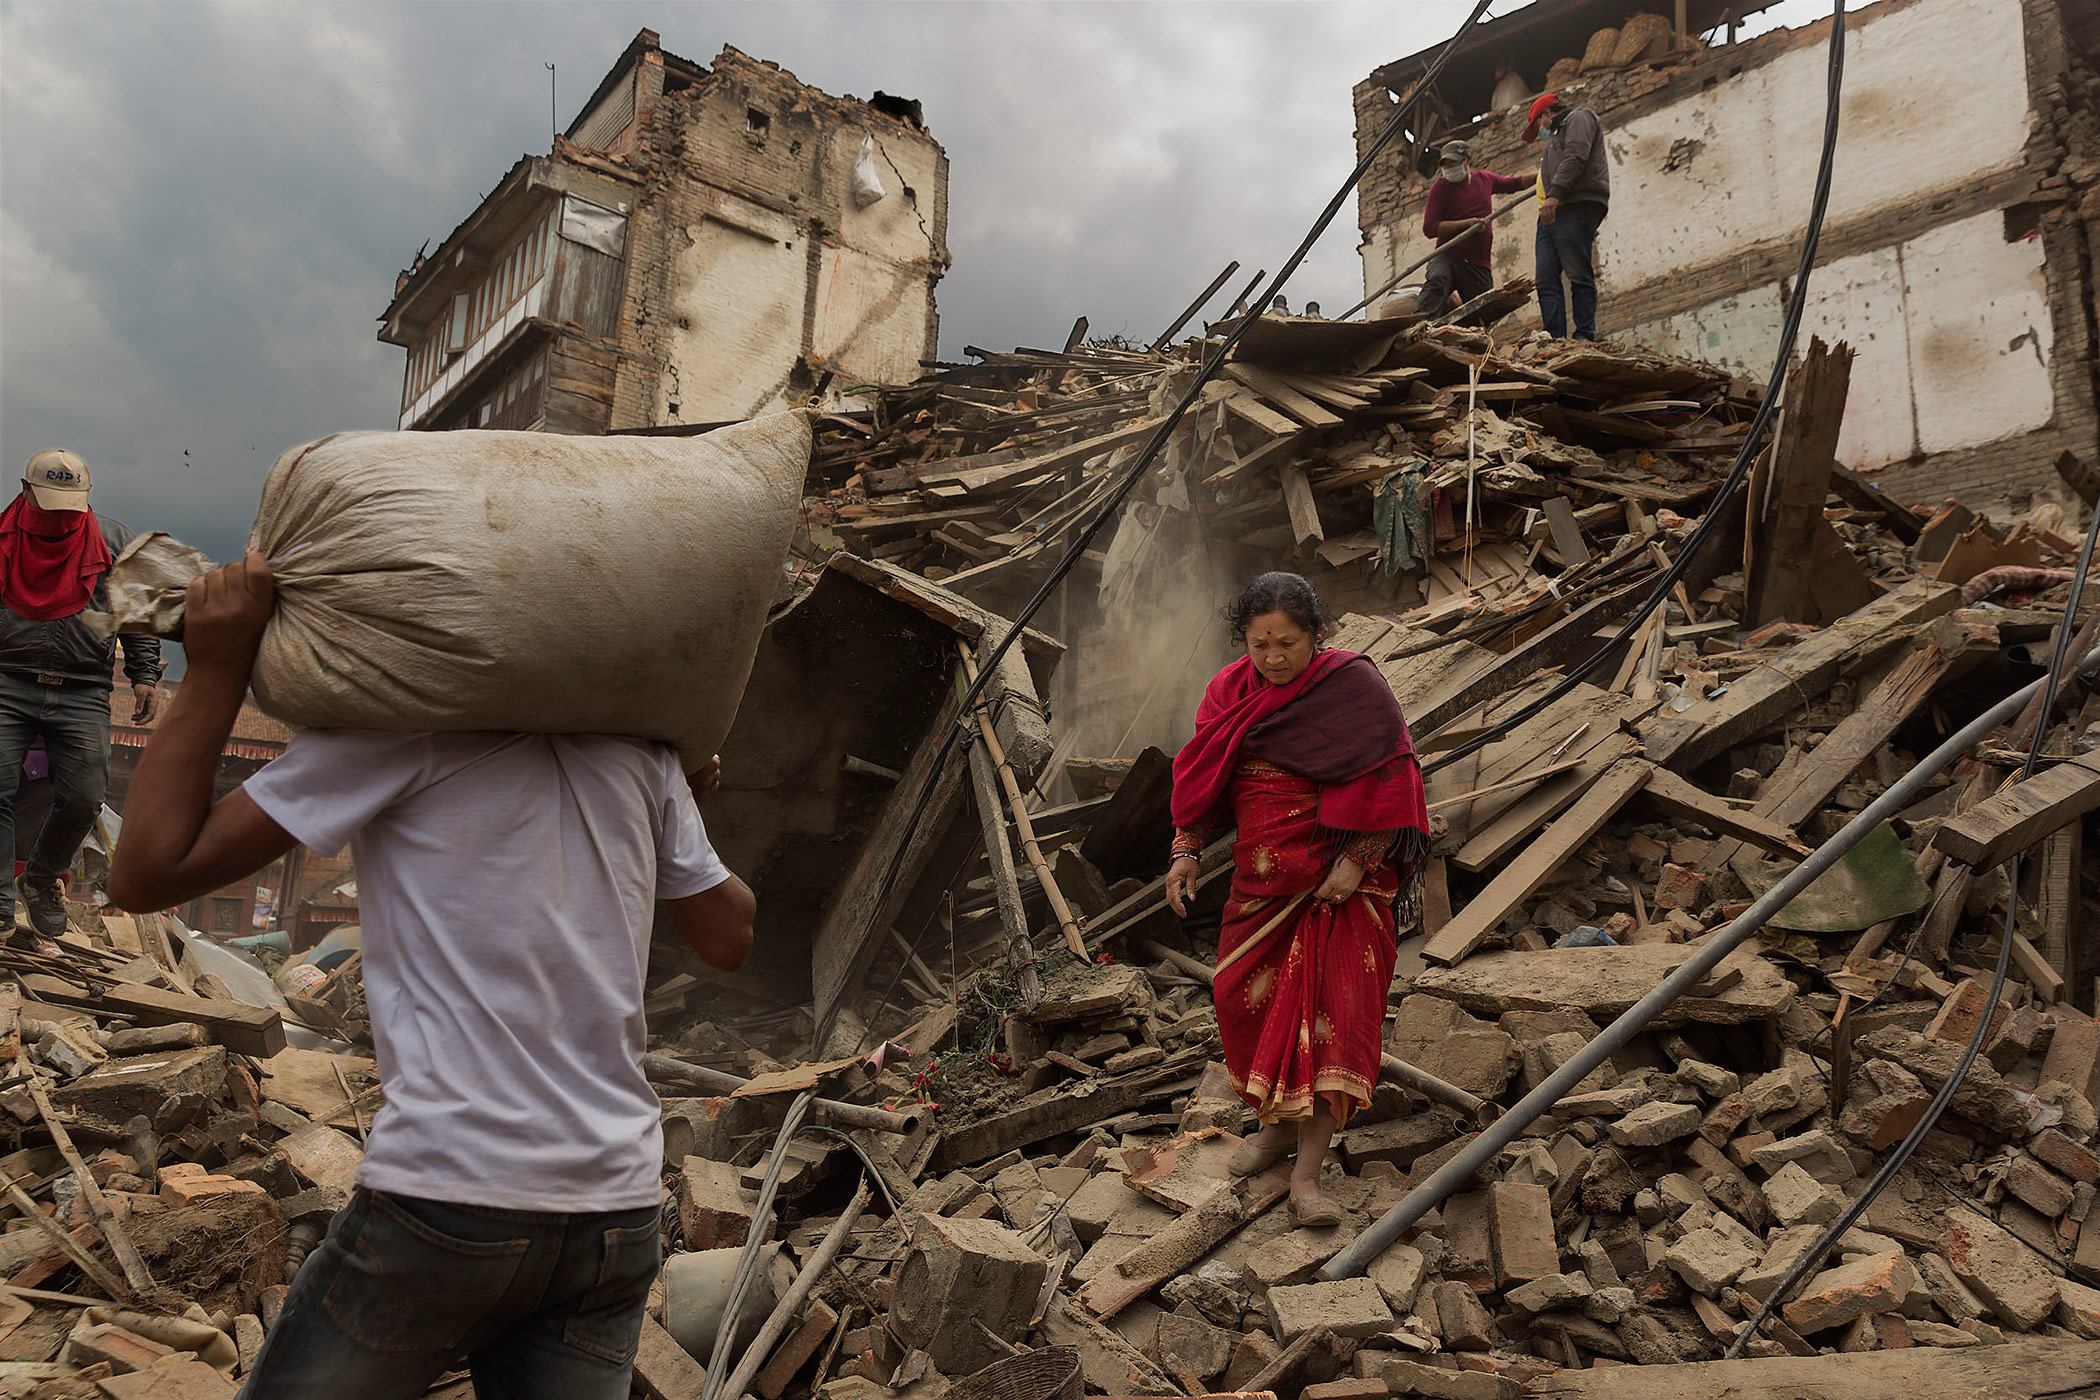 People reclaim their possessions from the wreckage in Bhaktapur, Nepal. (James Nachtwey for TIME)